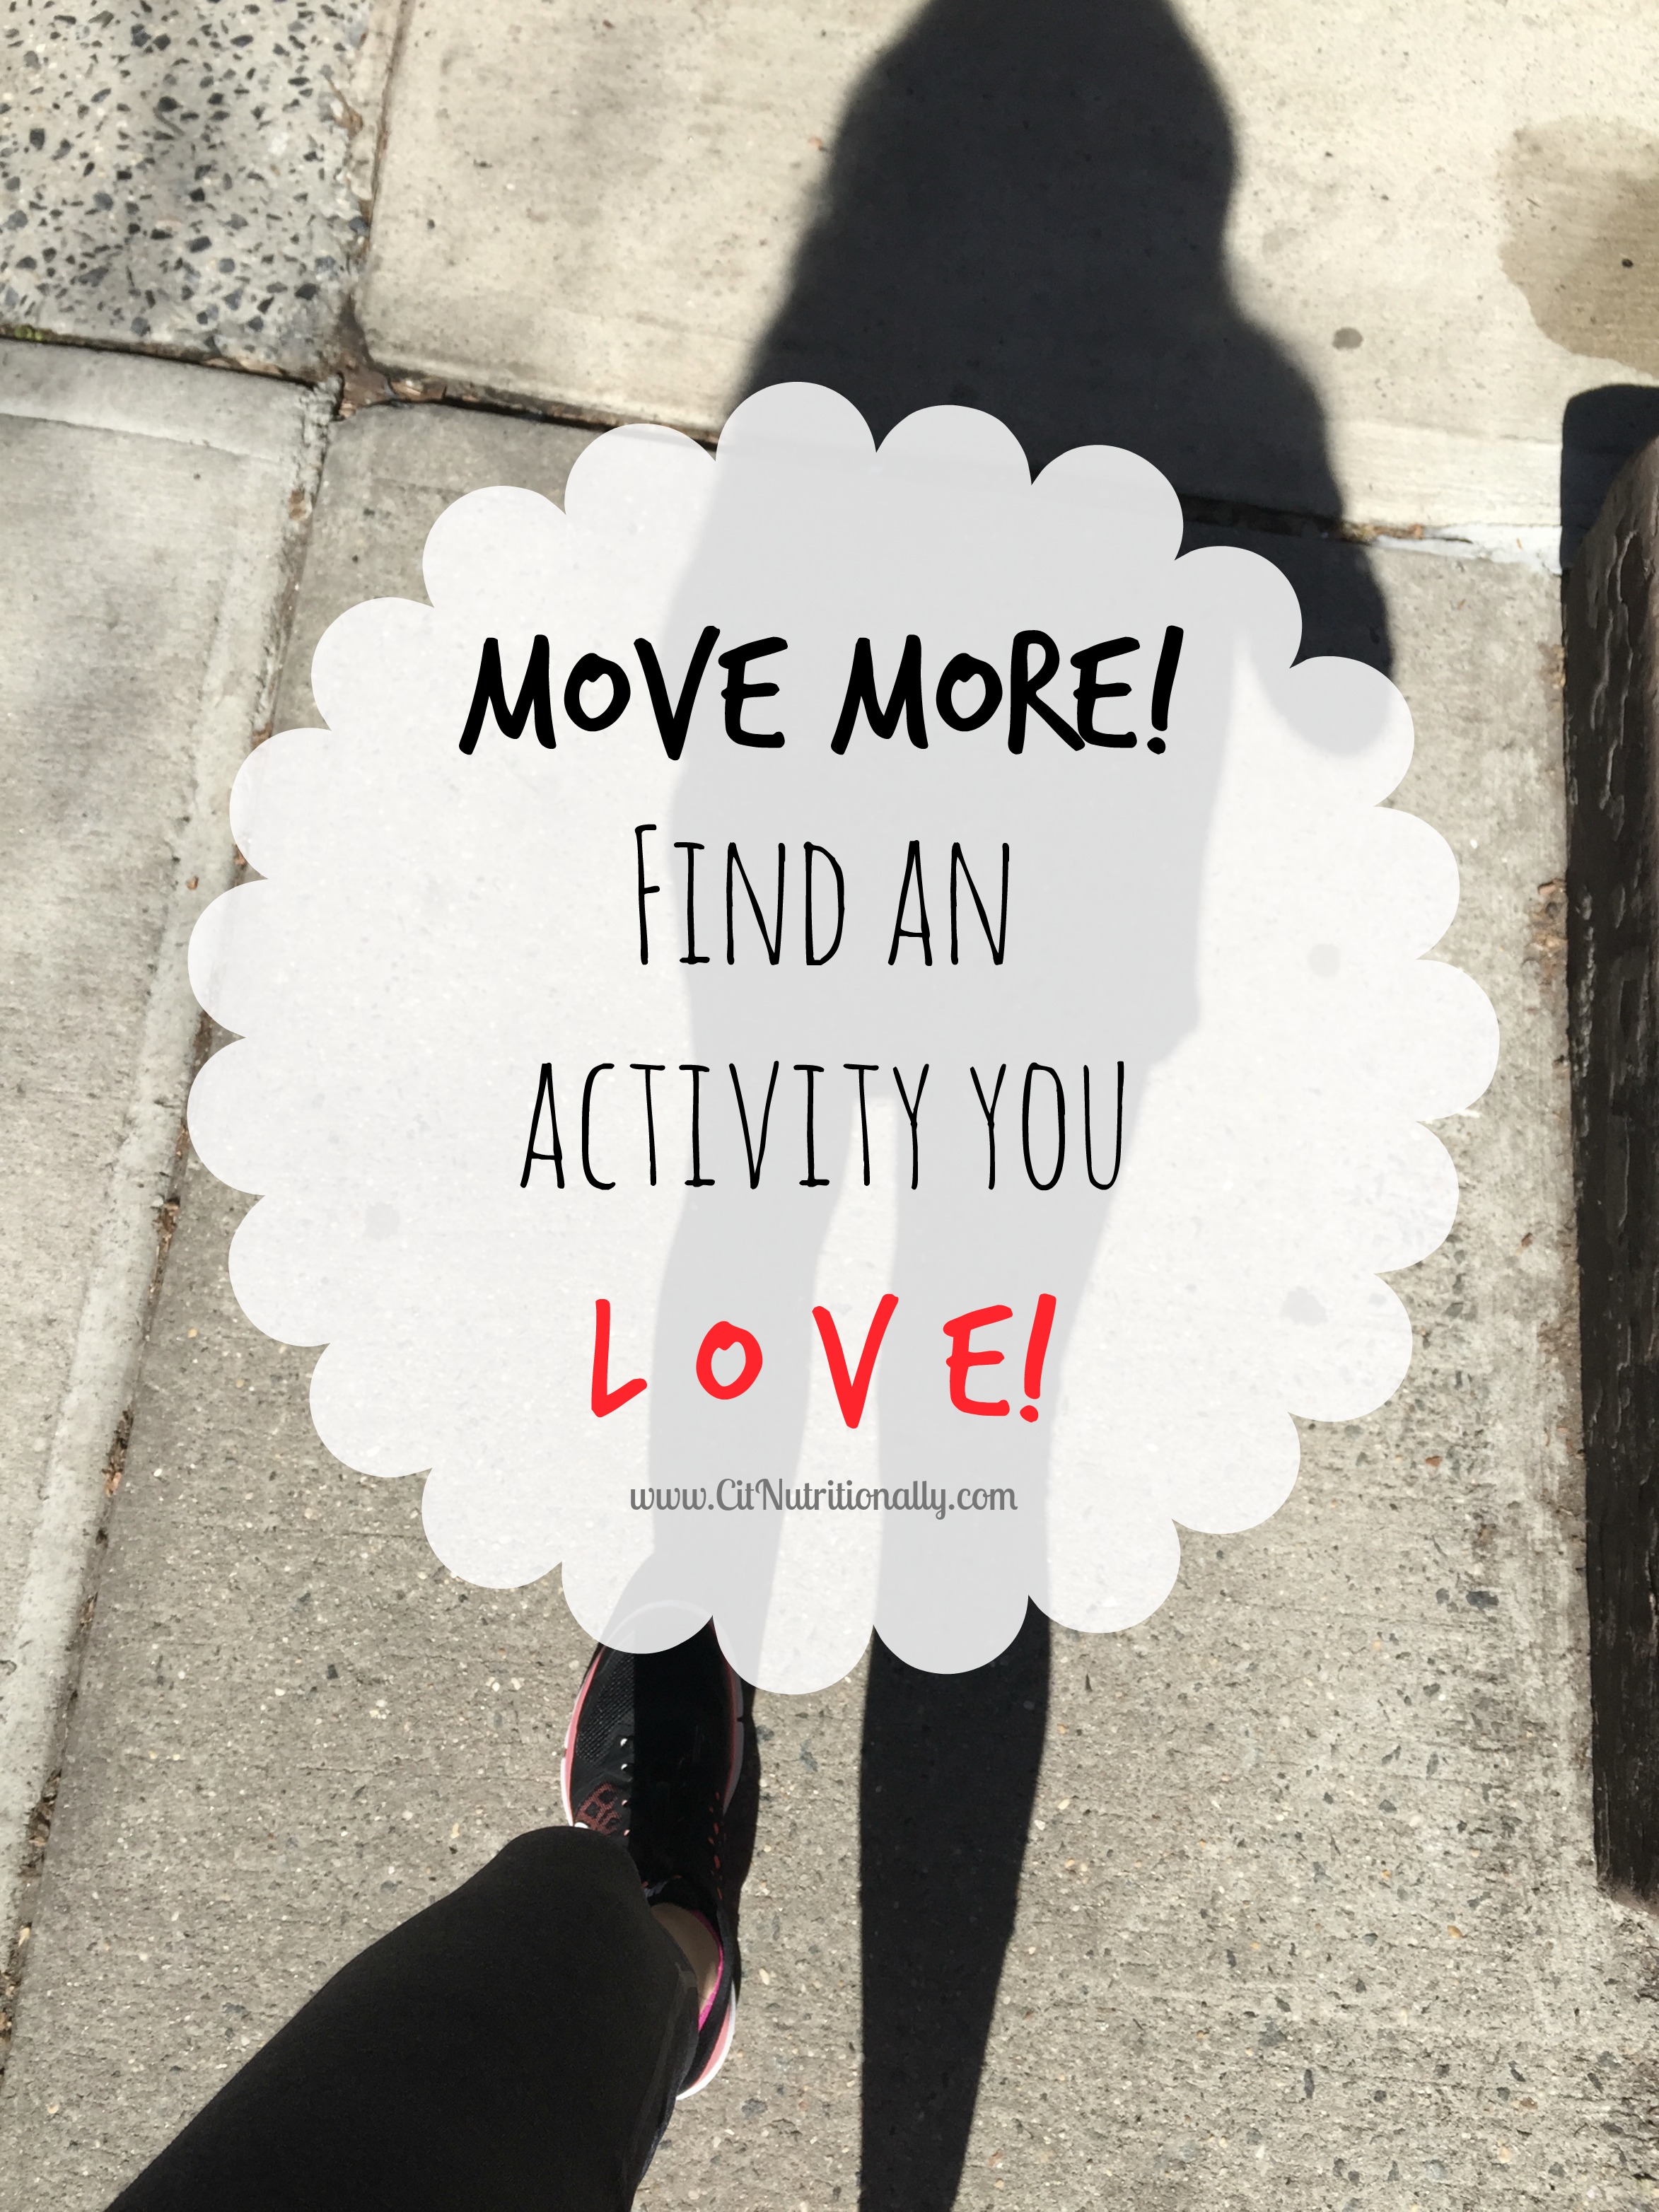 Moving more in 2017: Find an activity you love! | C it Nutritionally